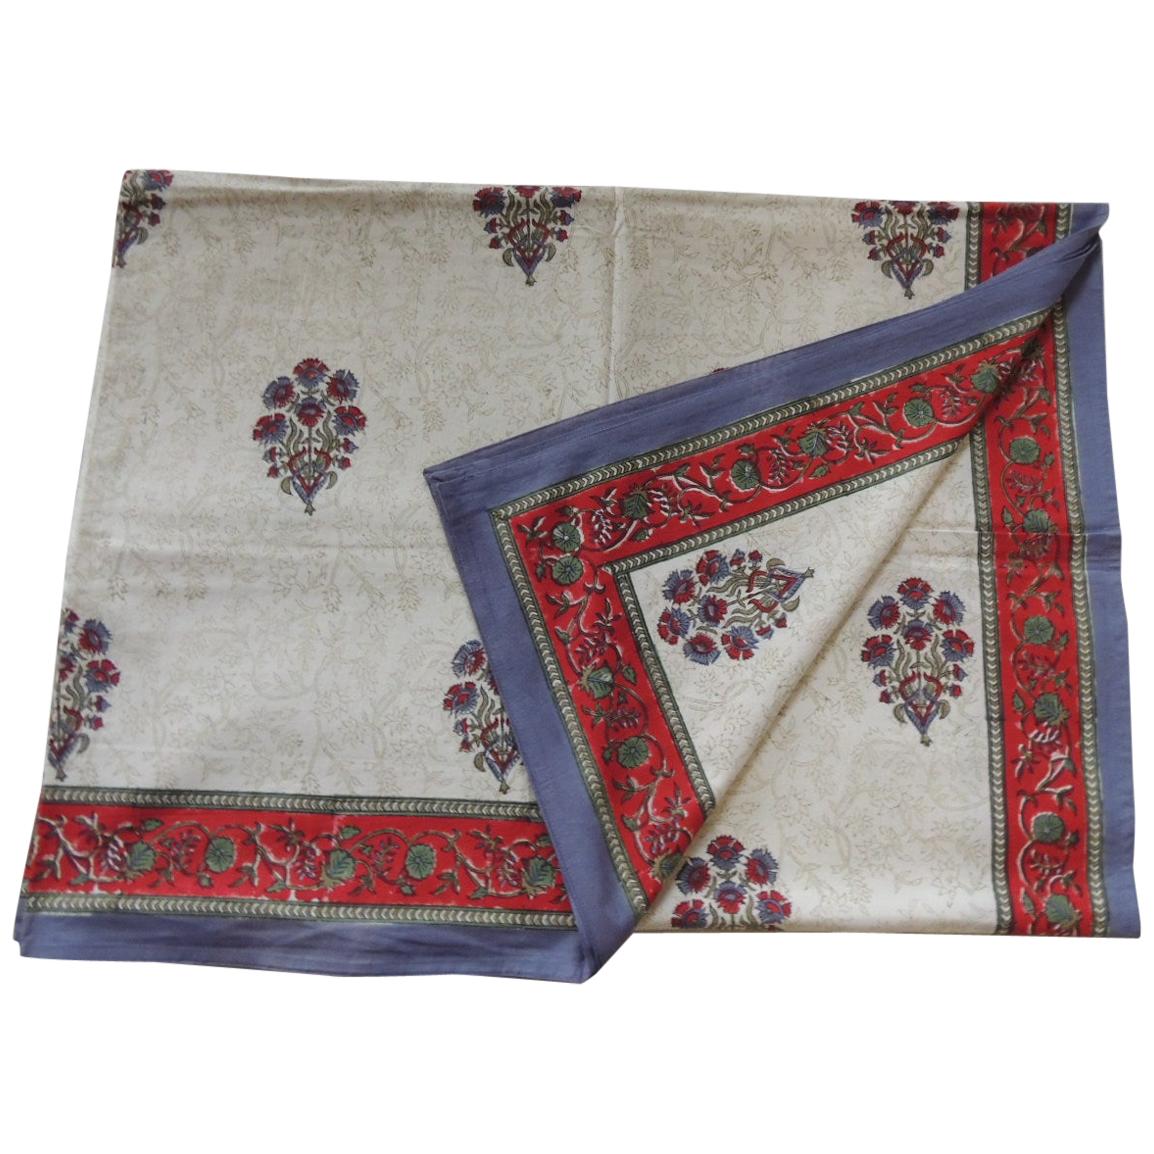 Blue and Red Hand-Blocked Indian Coverlet